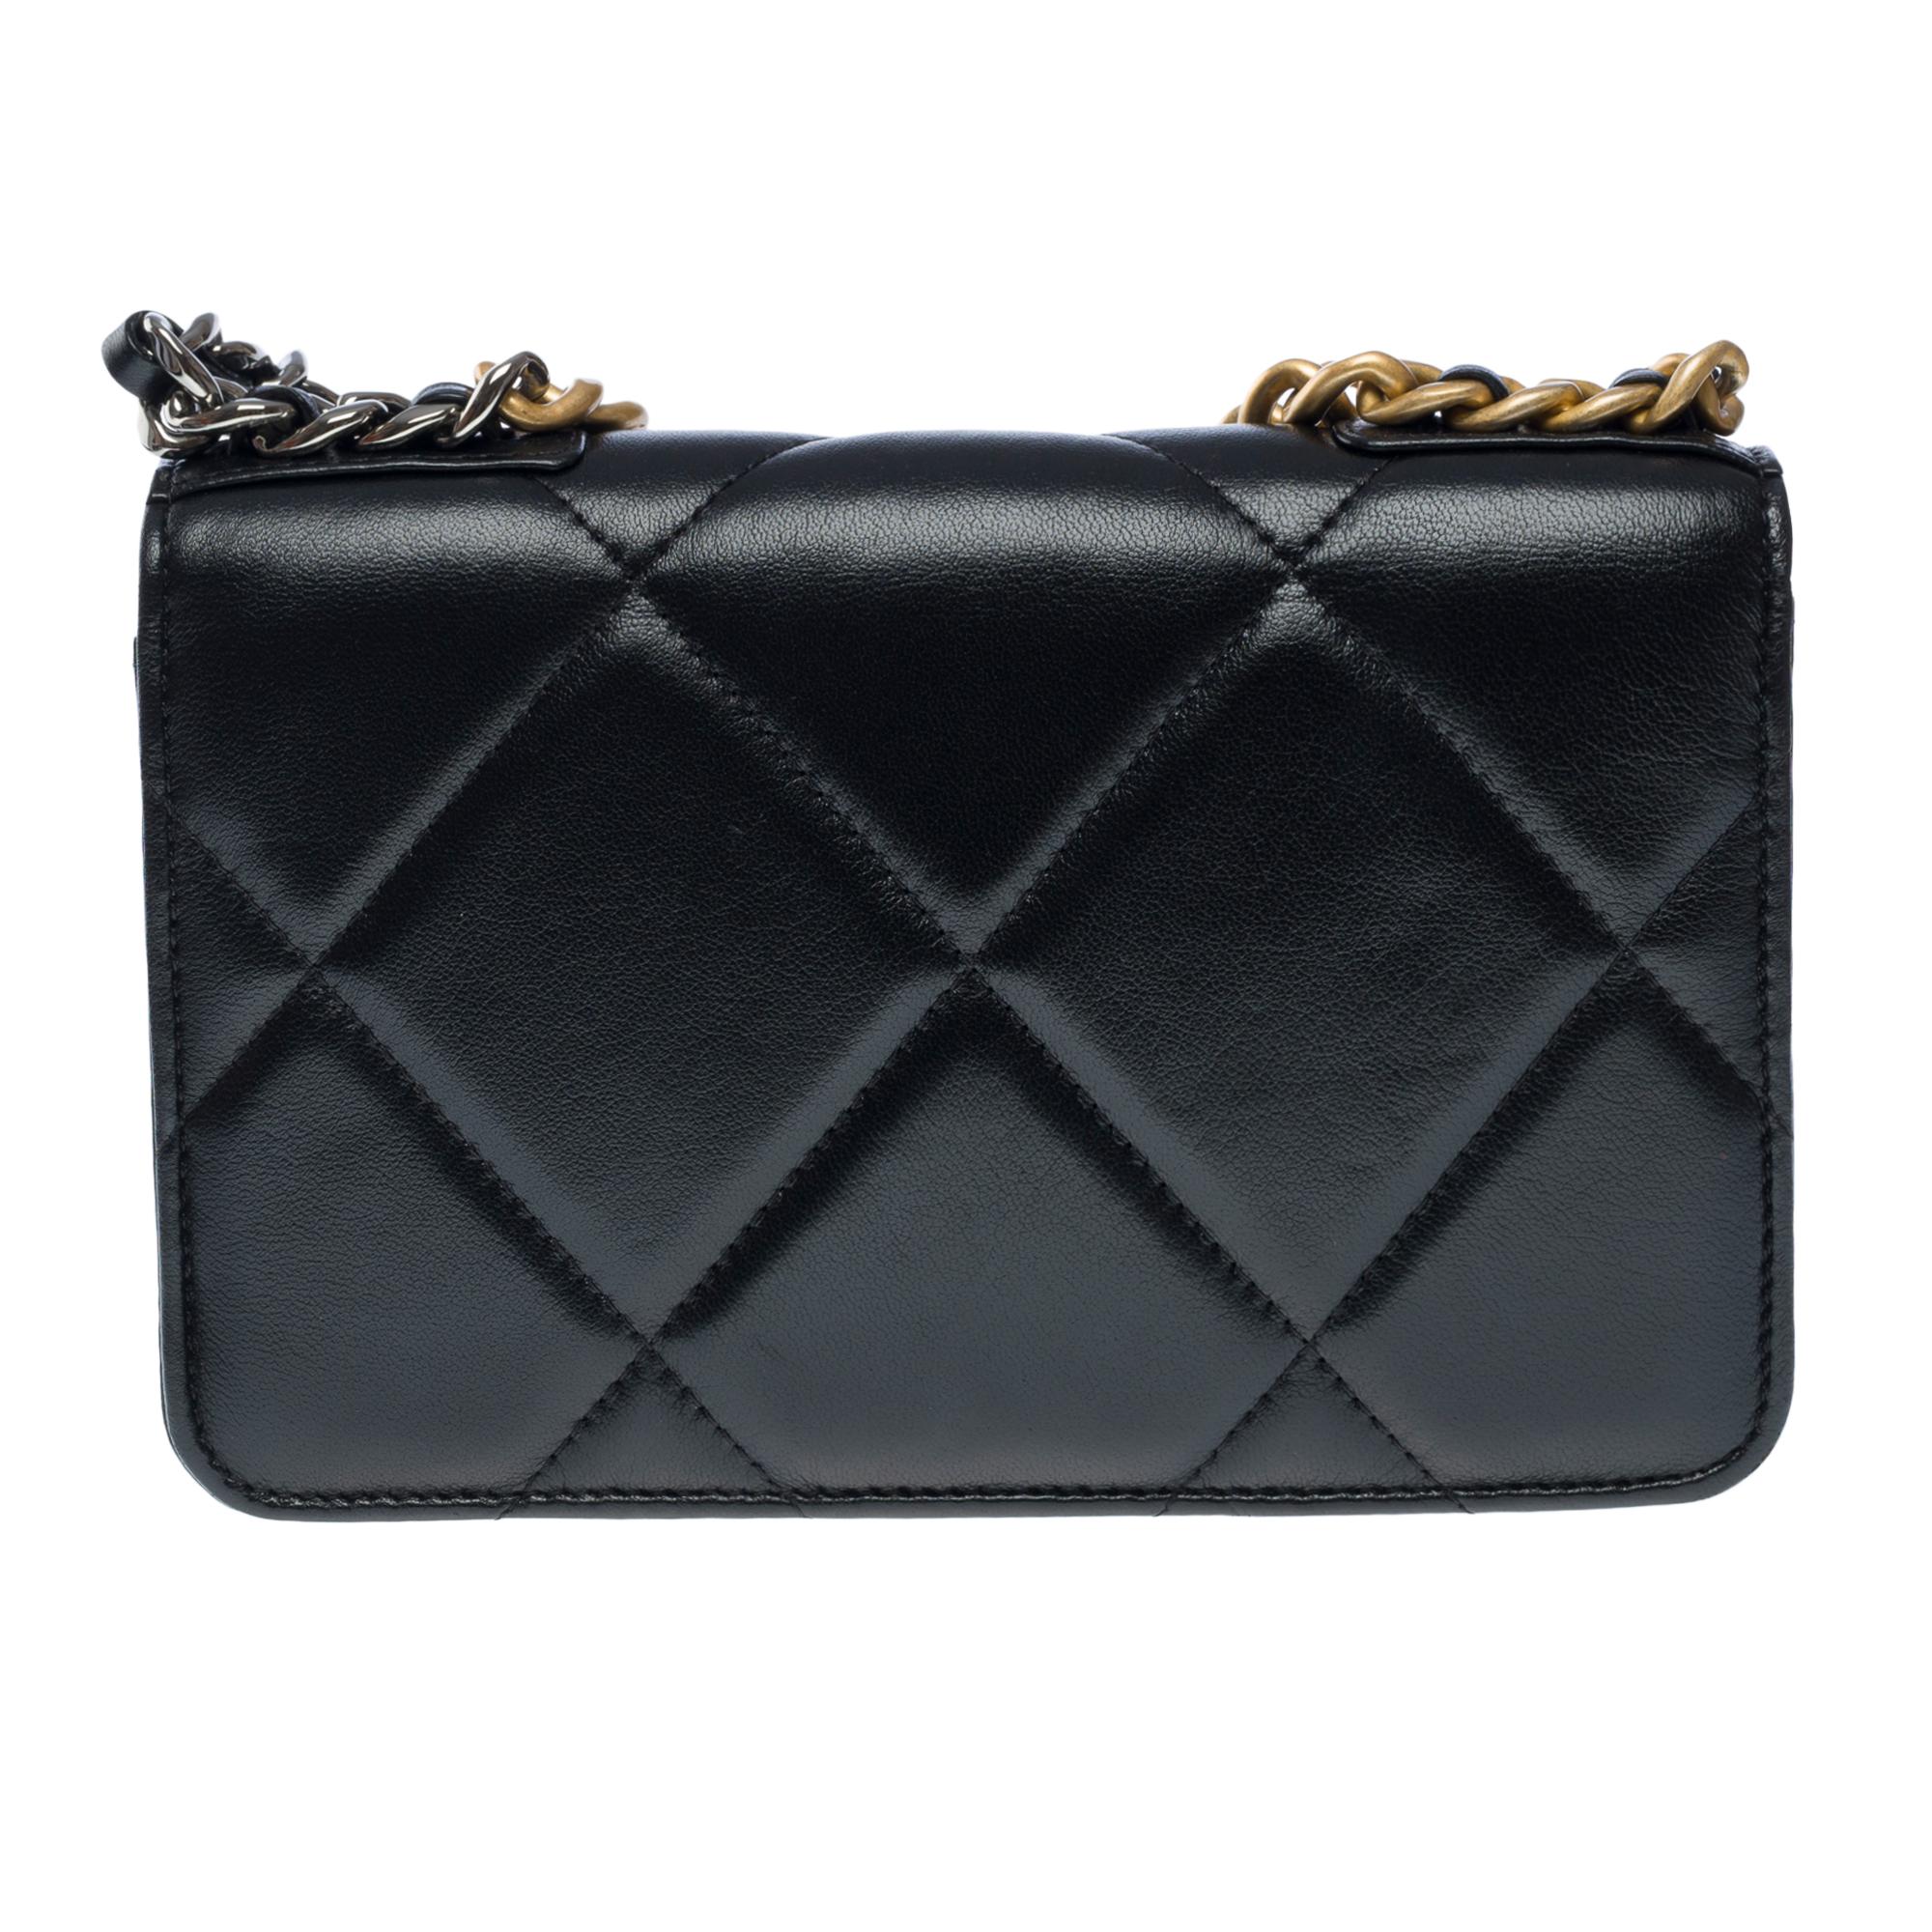 Black Chanel Wallet on Chain (WOC) 19 shoulder bag in black lambskin quilted leather